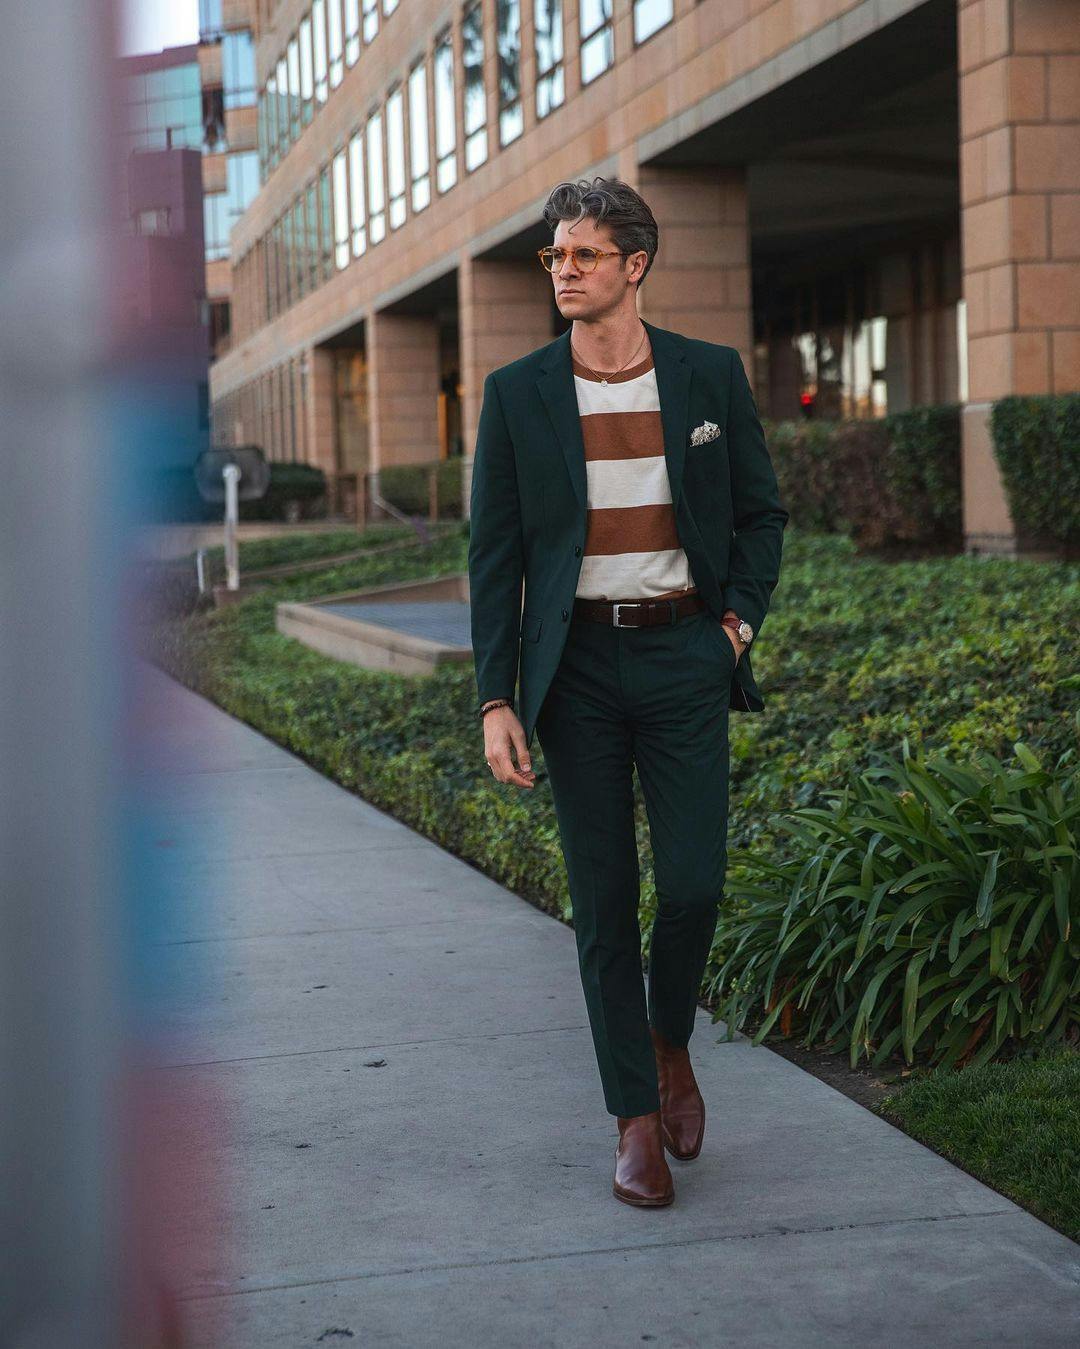 Unexpected way to style a suit professionally with a full dark green suit for men, contrasting rust orange striped t shirt, and brown suit accessories.